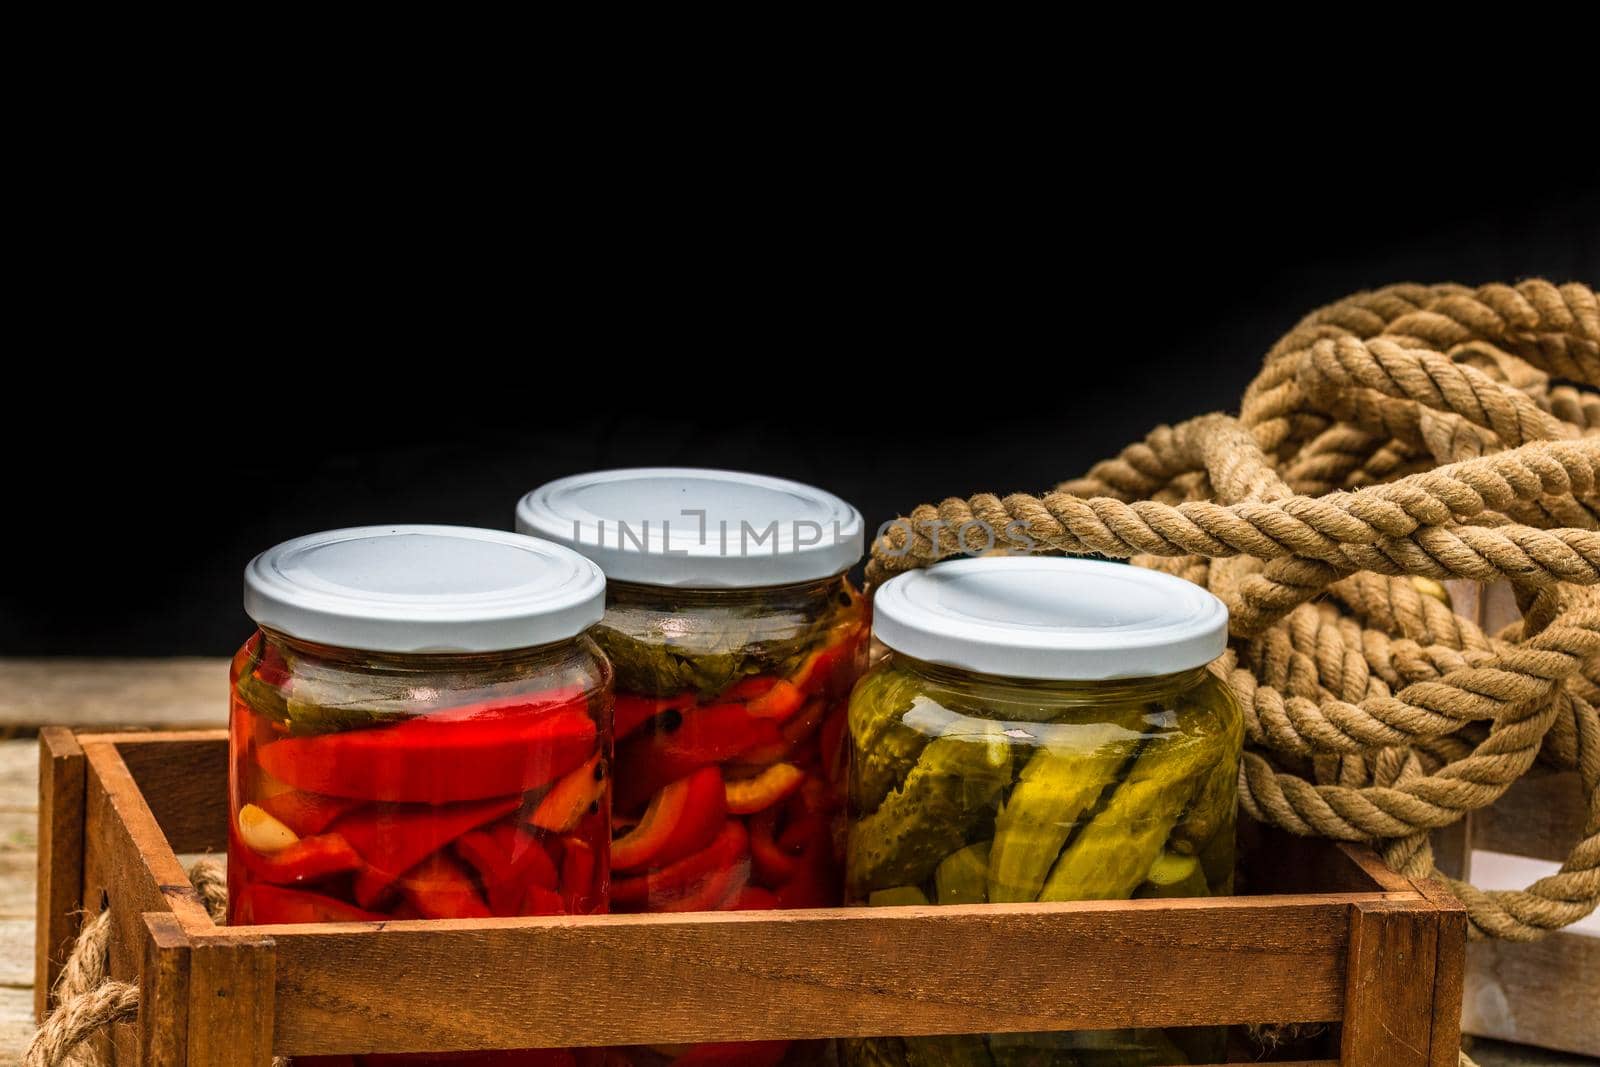 Wooden crate with glass jars with pickled red bell peppers and pickled cucumbers (pickles) isolated. Jars with variety of pickled vegetables. Preserved food concept in a rustic composition. by vladispas